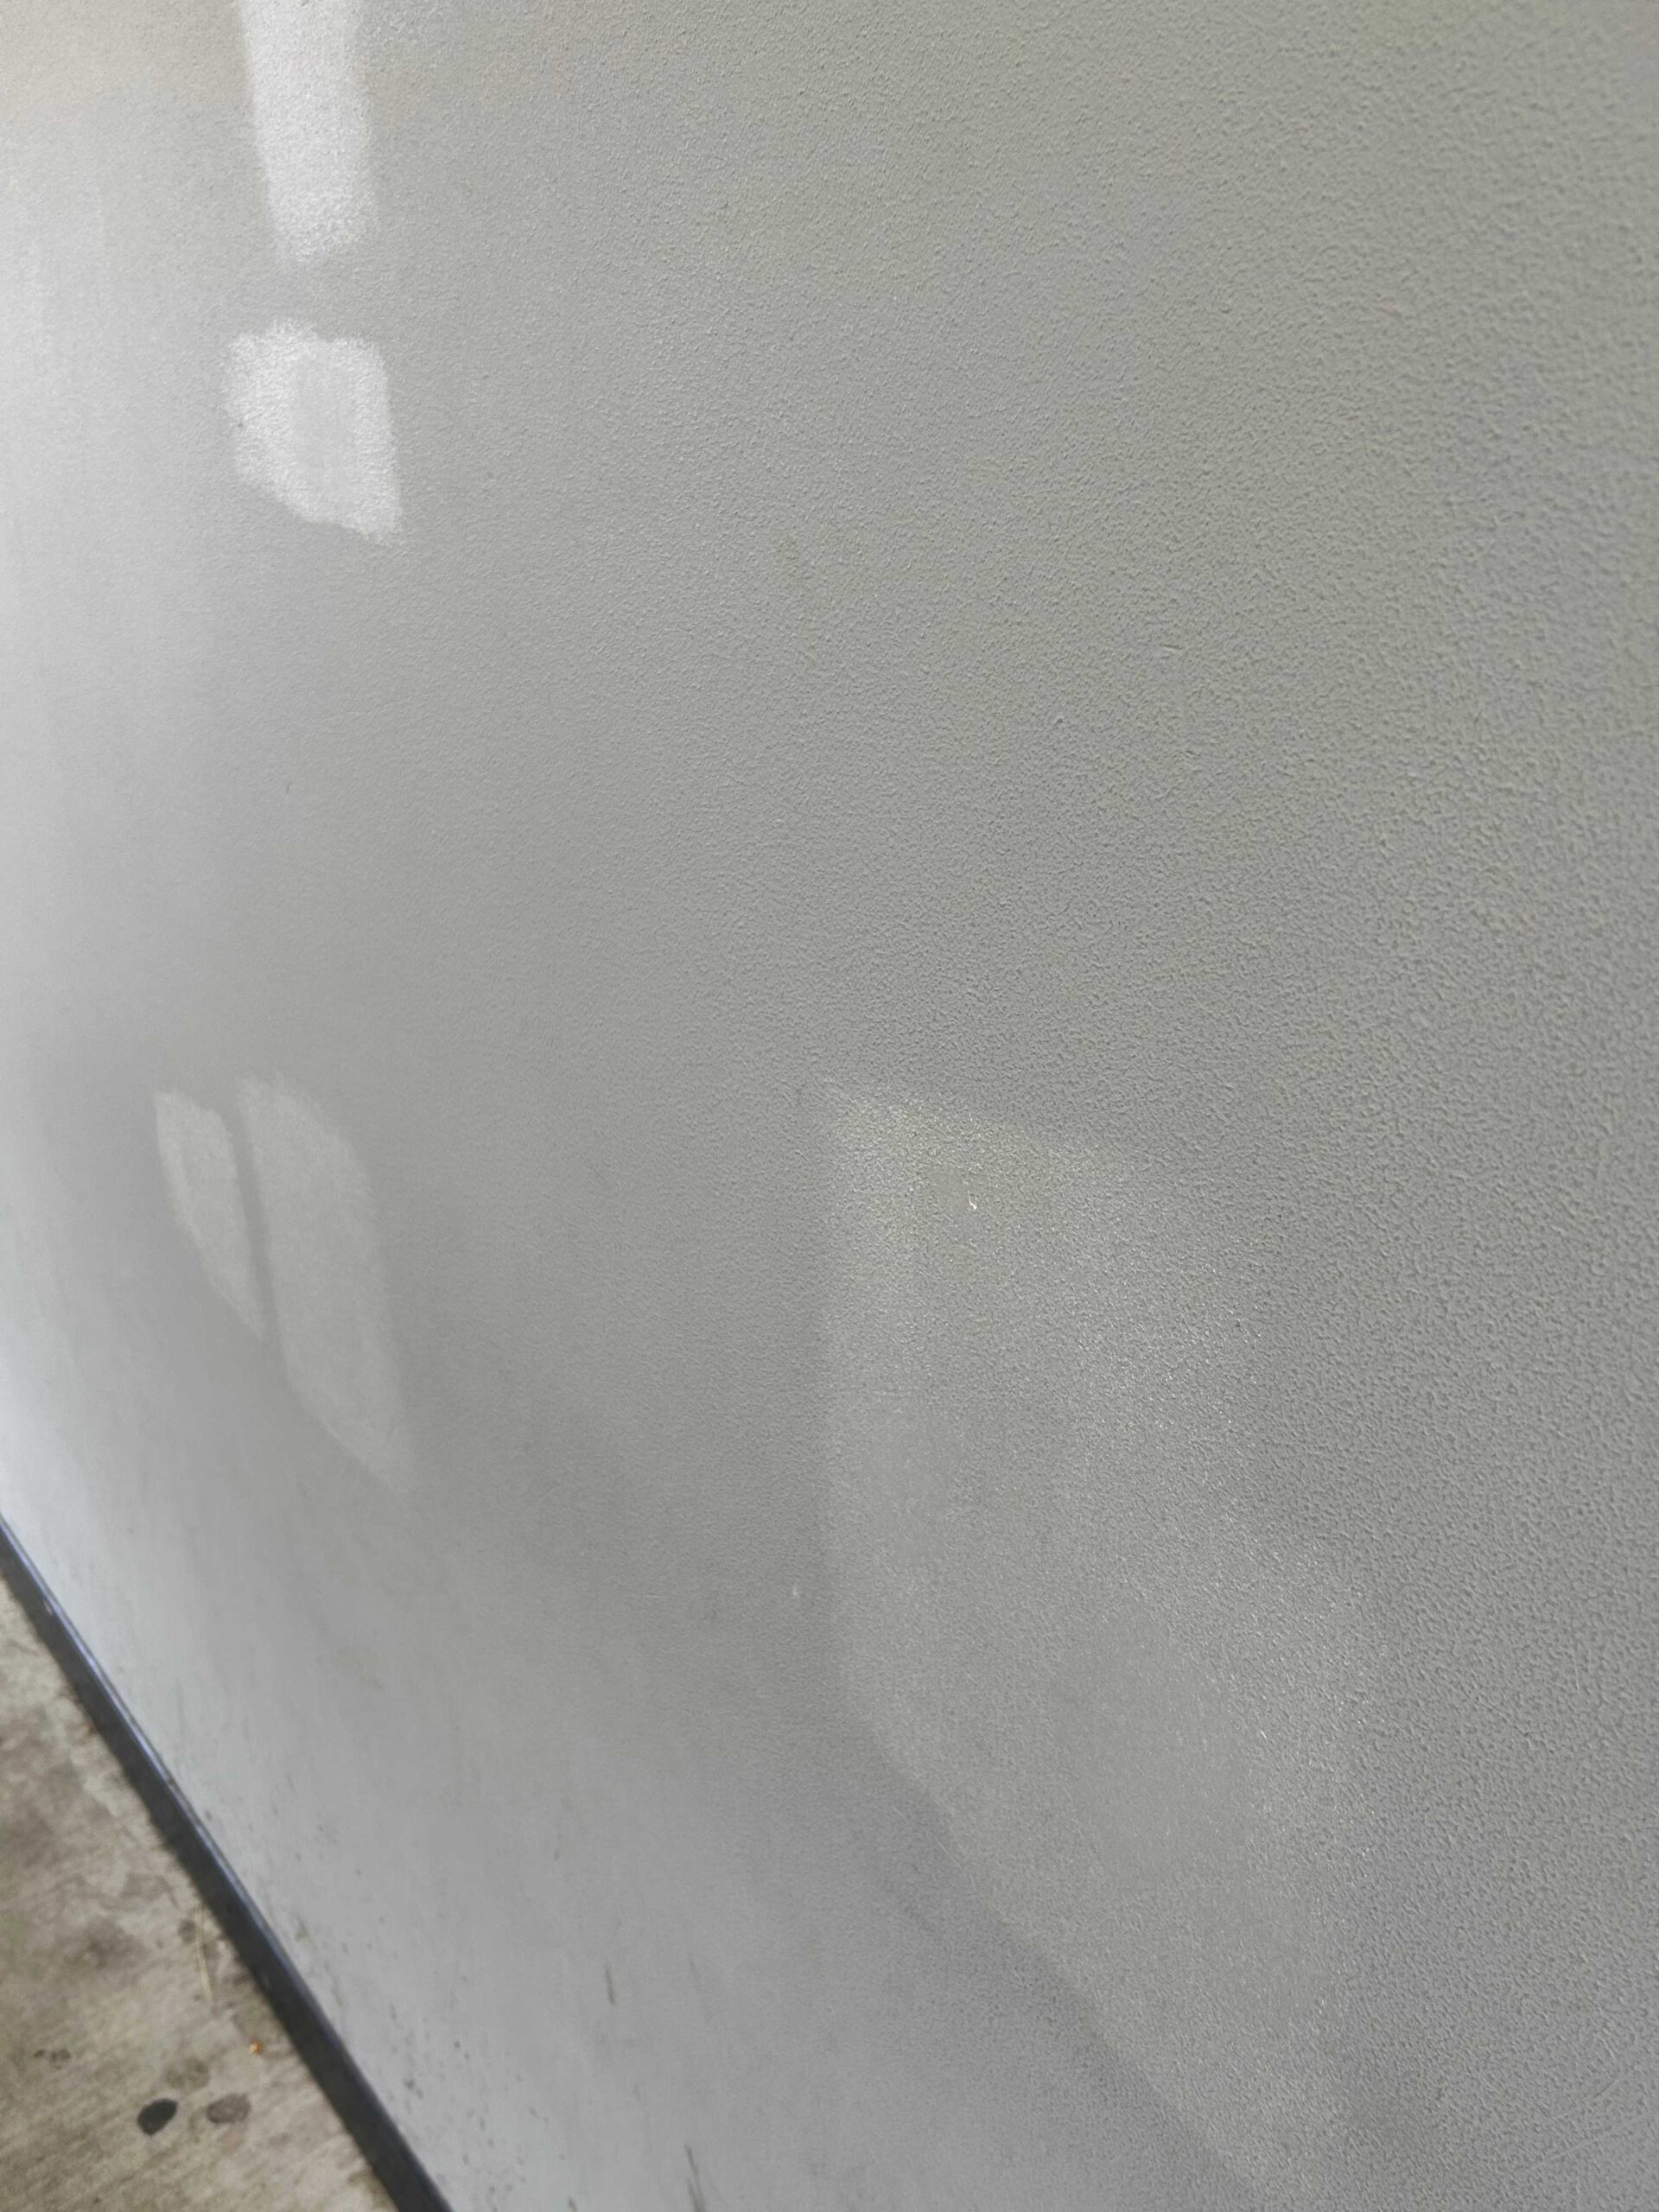 Why “Touch-Up” Painting Doesn’t Work or Look Good